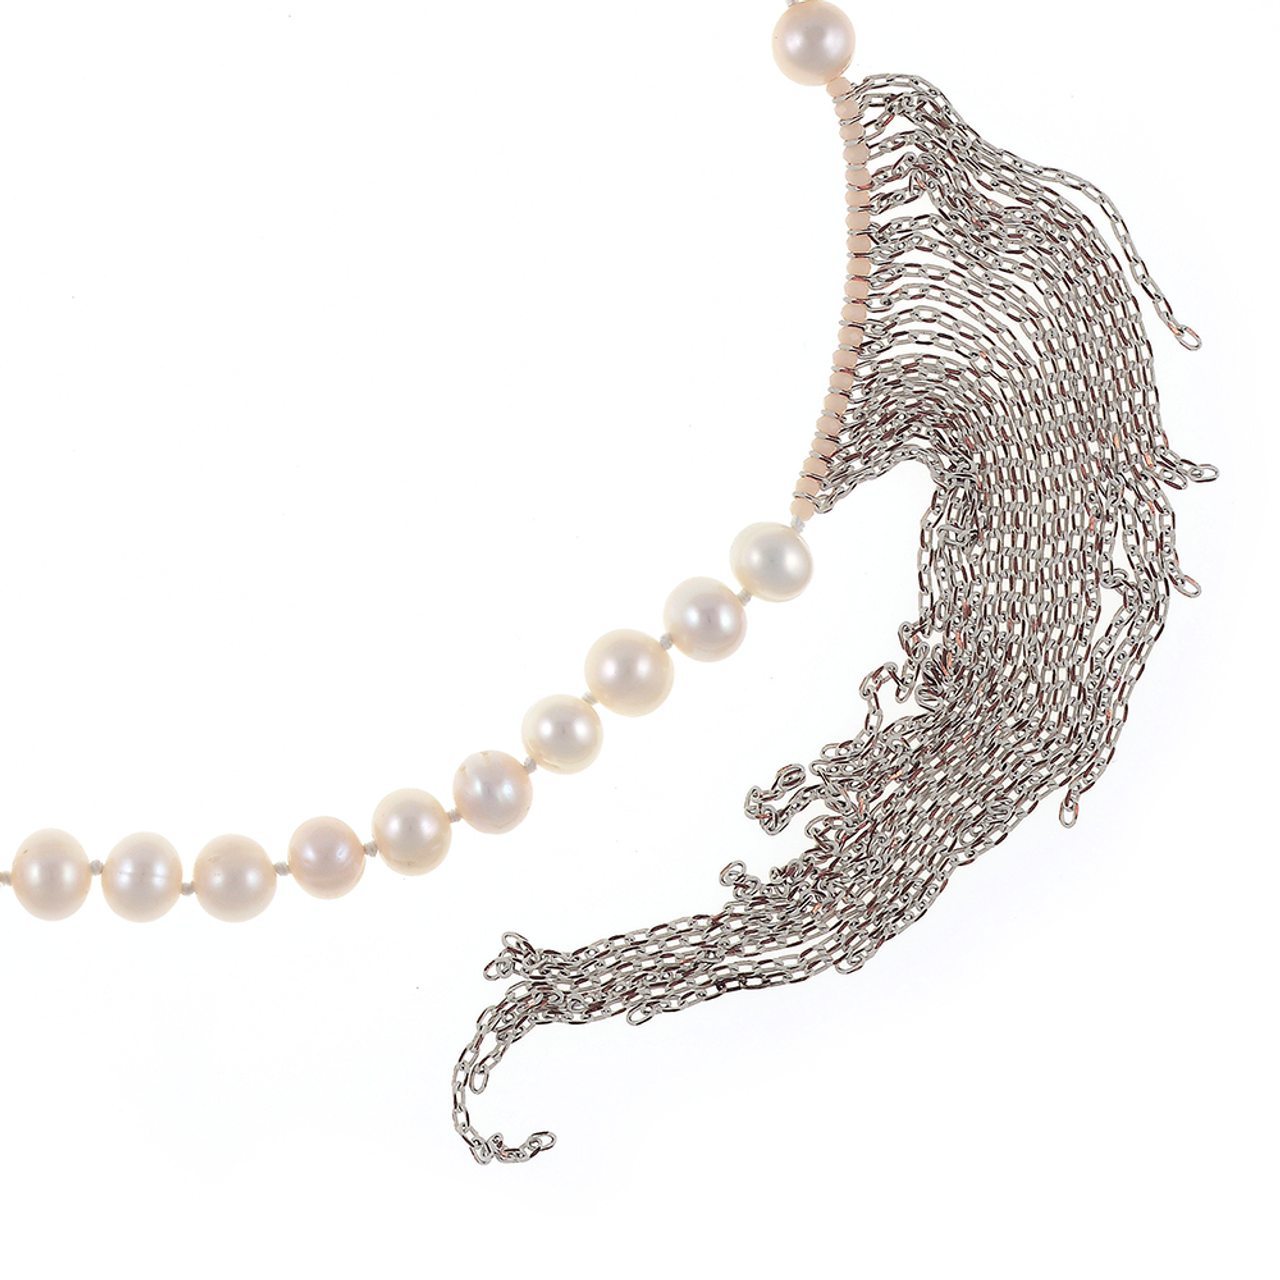 Bewitching Freshwater Pearl Necklace with fine Chain Accent